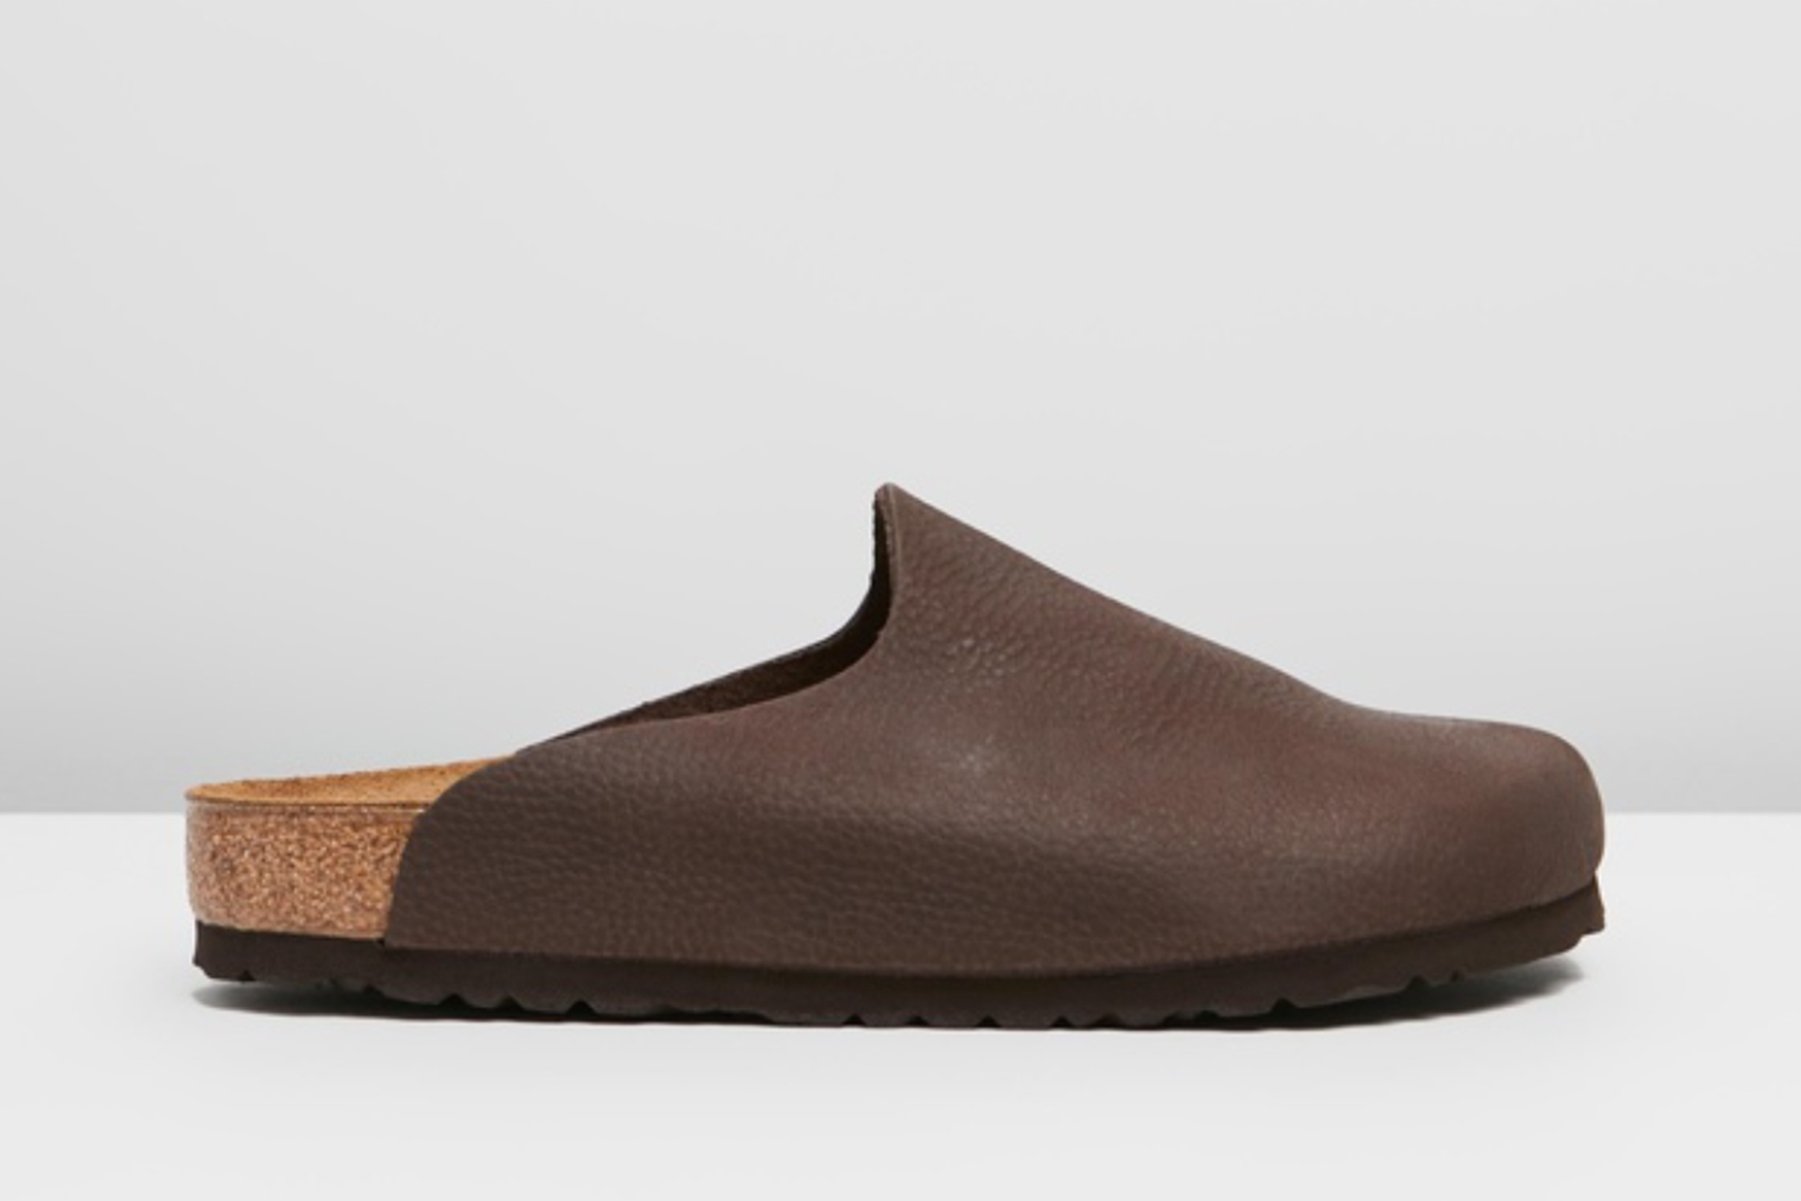 12 of the best clogs to buy right now according to the RUSSH editors